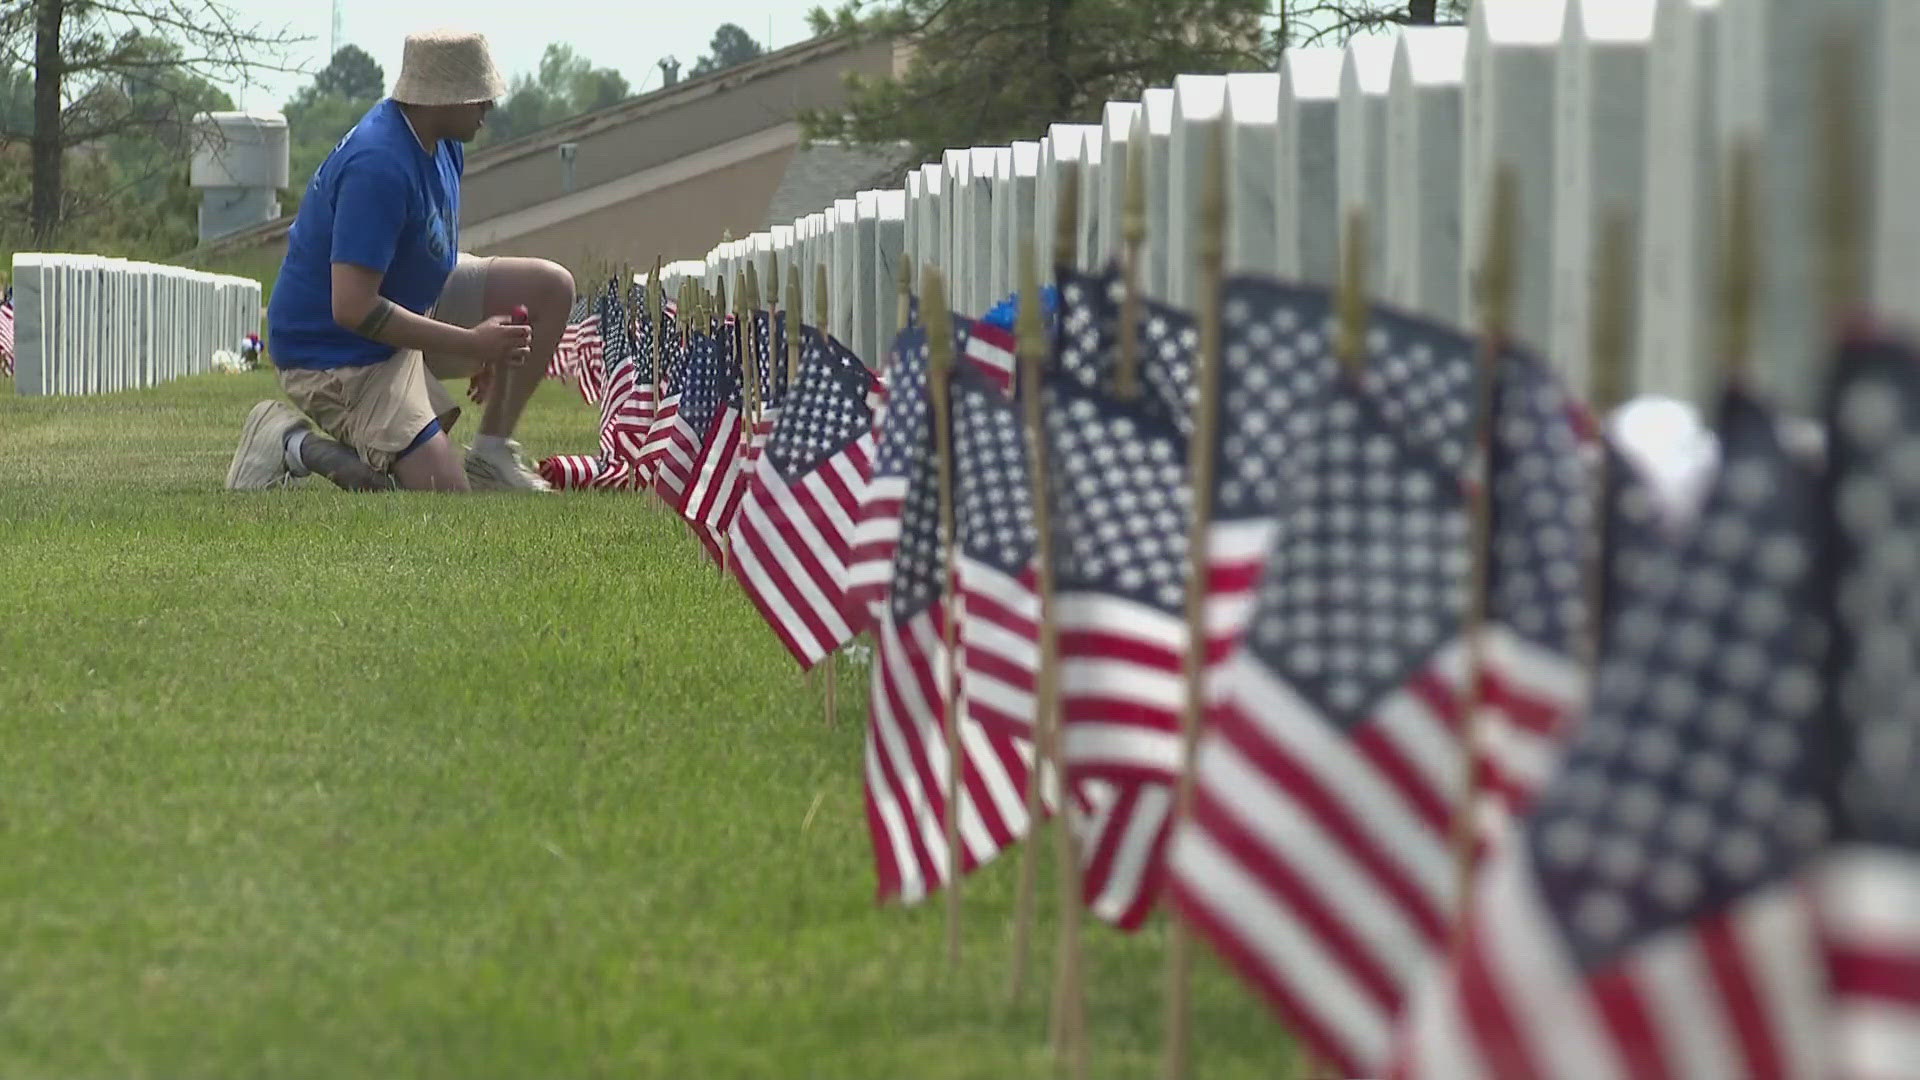 Monday, Fort Logan is holding a Memorial Day wreath-laying ceremony to honor fallen veterans.